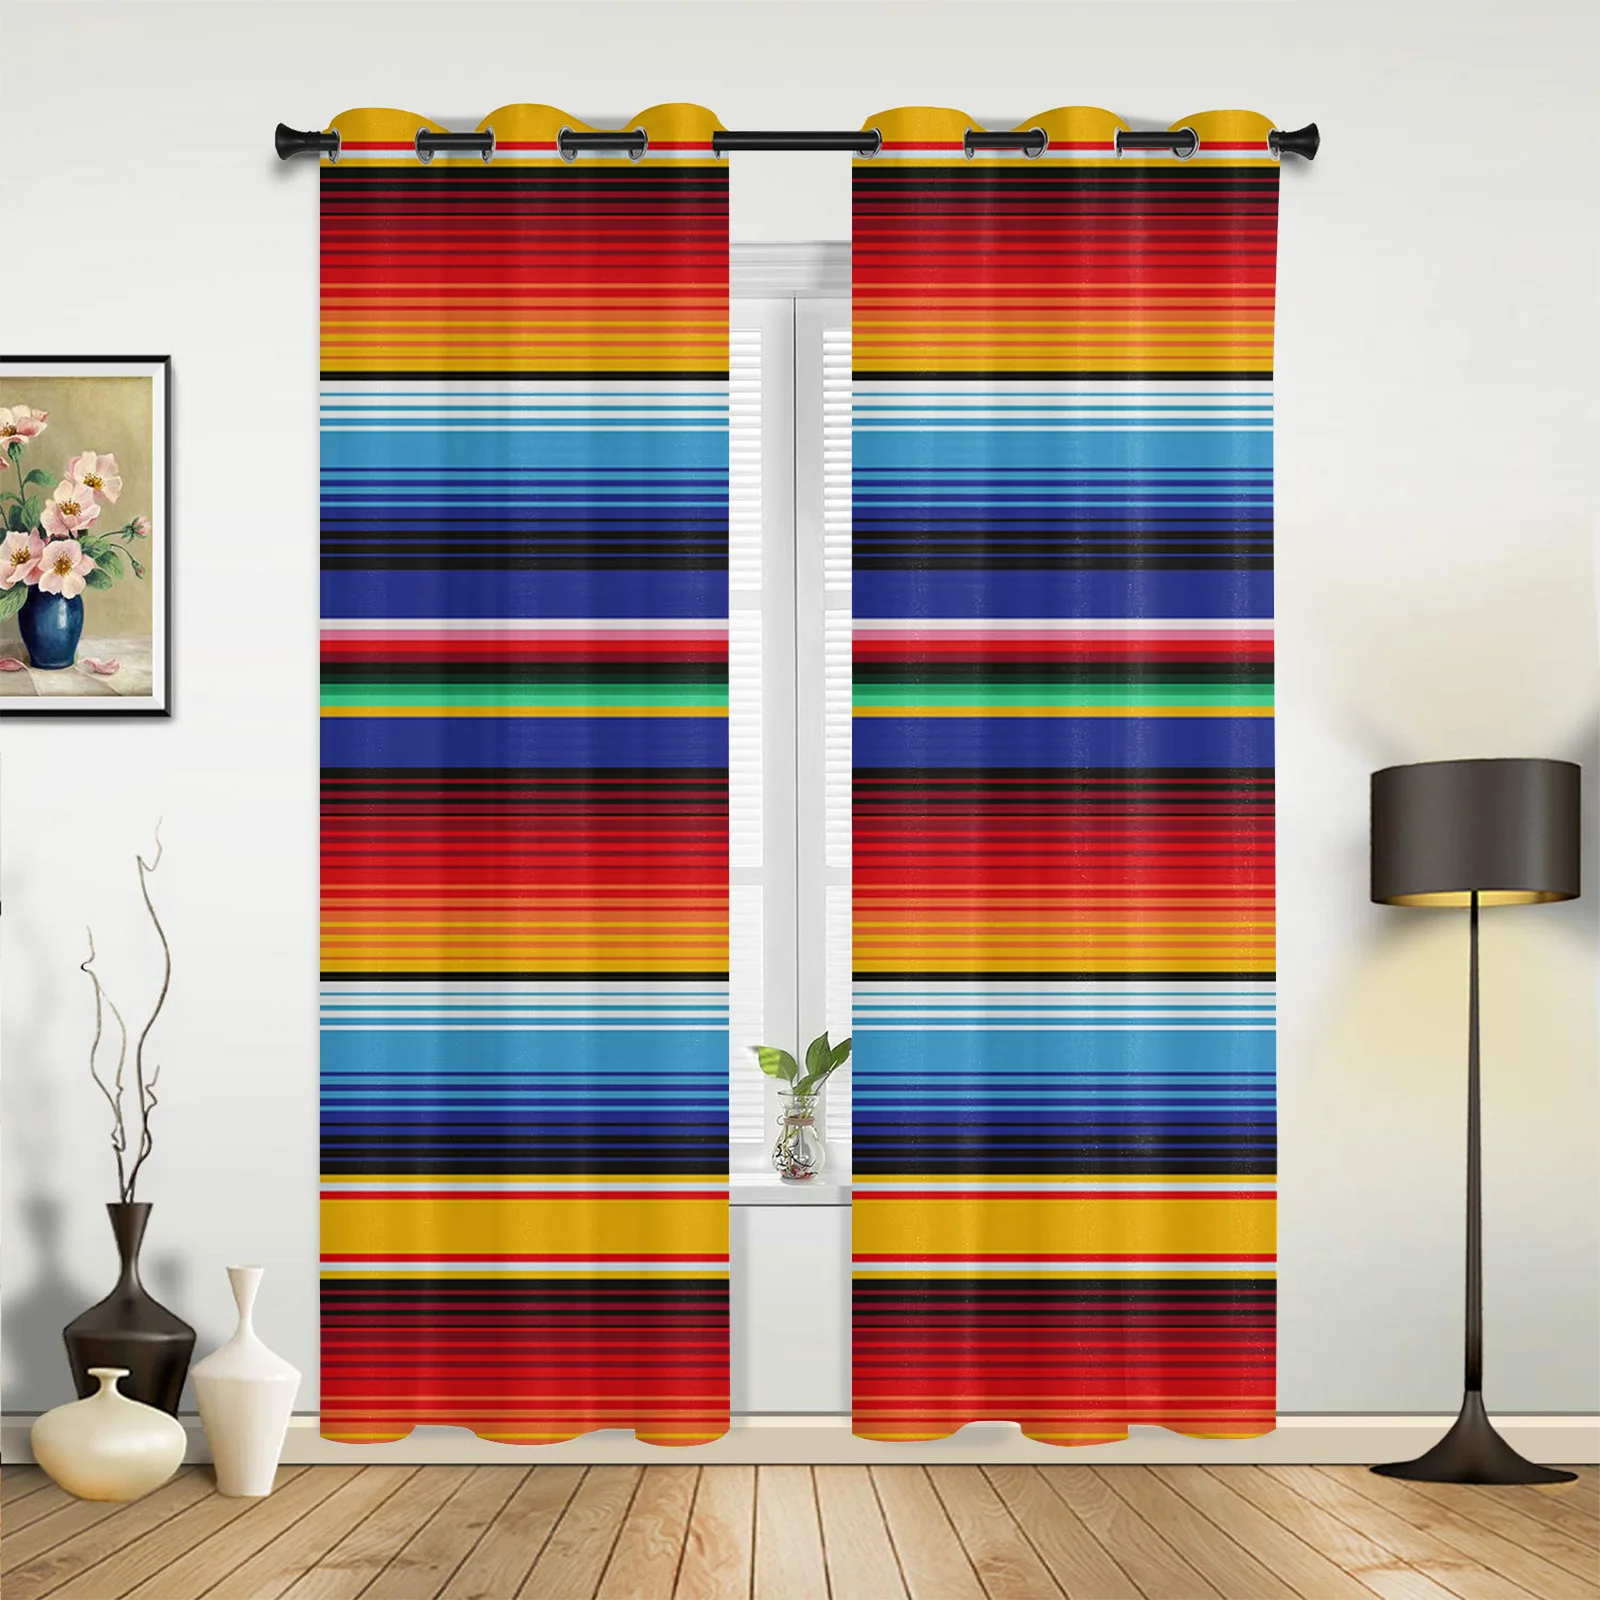 

3D Colorful Mexican Stripes New Window Curtains for Living Room Kitchen Indoor Decor Window Treatment Valances Curtain 2 Panels